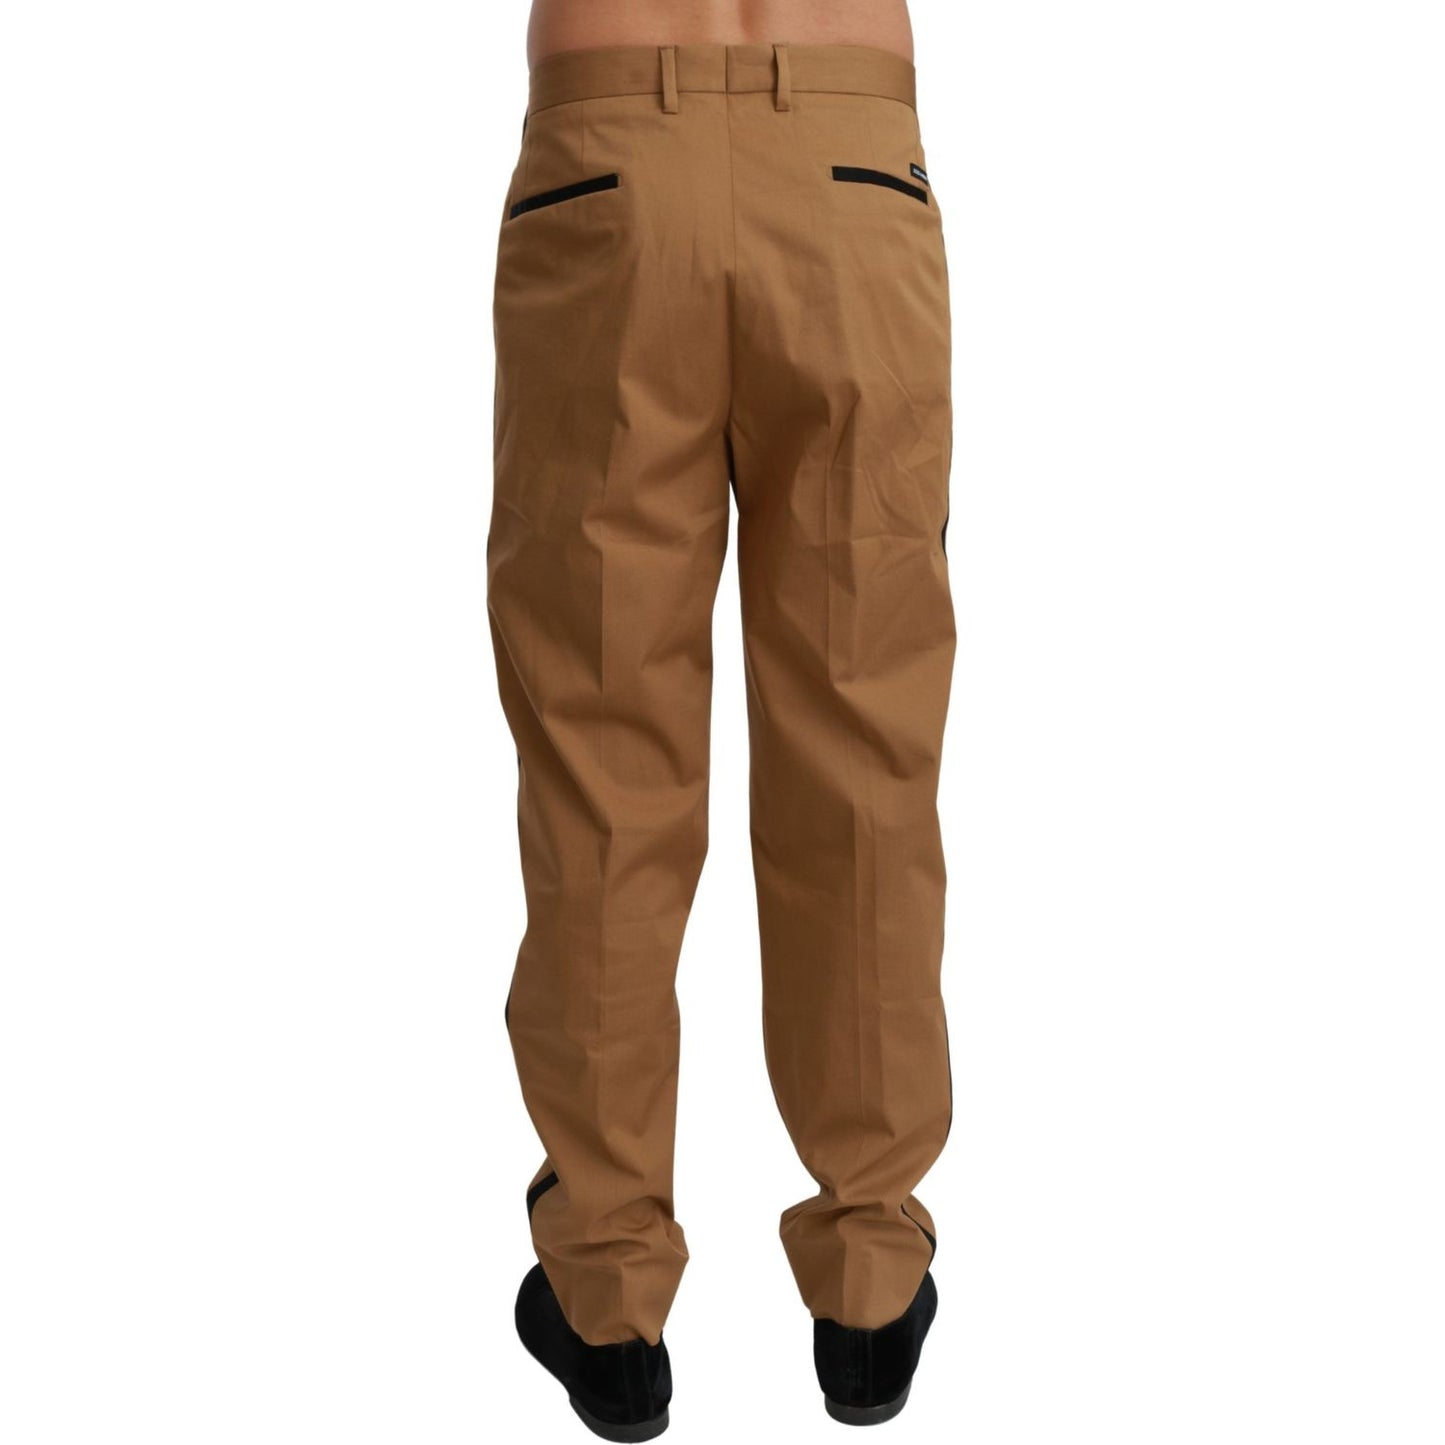 Dolce & Gabbana Elegant Slim Fit Brown Casual Pants brown-chinos-trousers-cotton-stretch-pants IMG_3315-scaled-79ee9cd1-bde.jpg